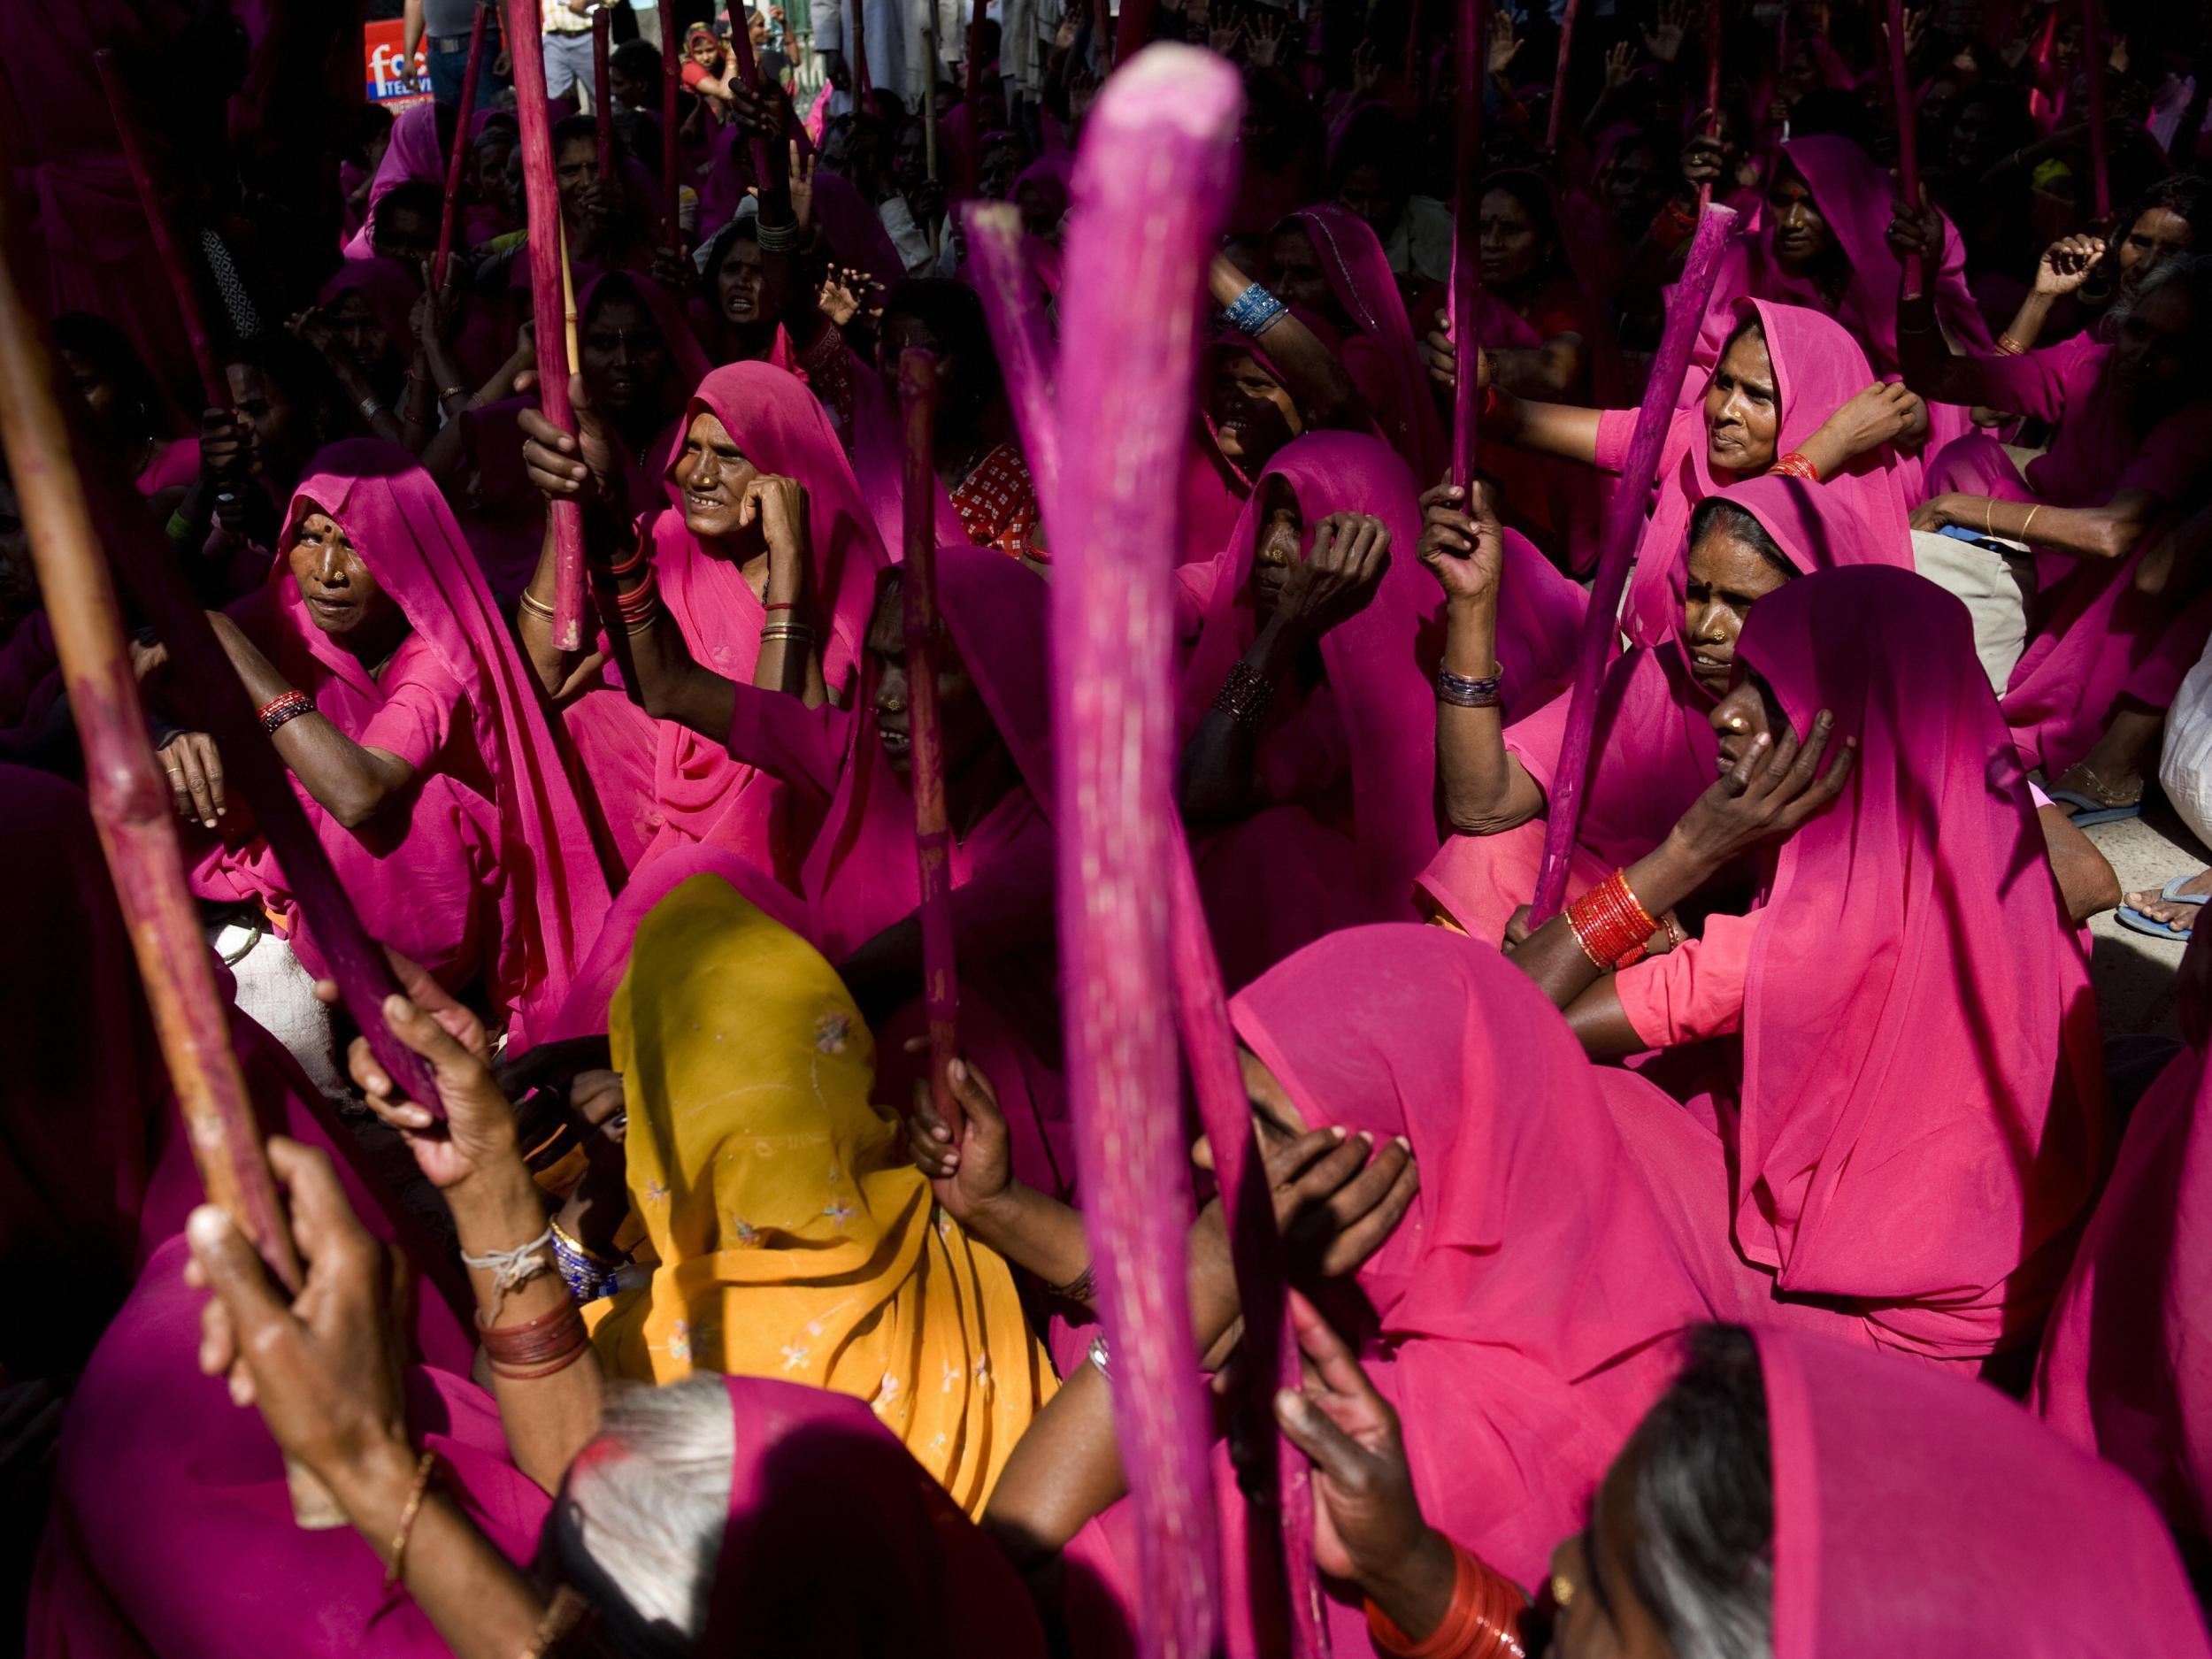 The feminist vigilante group the Gulabi gangs who have recently started a campaign in Madhya Pradesh to disrupt alcohol sales